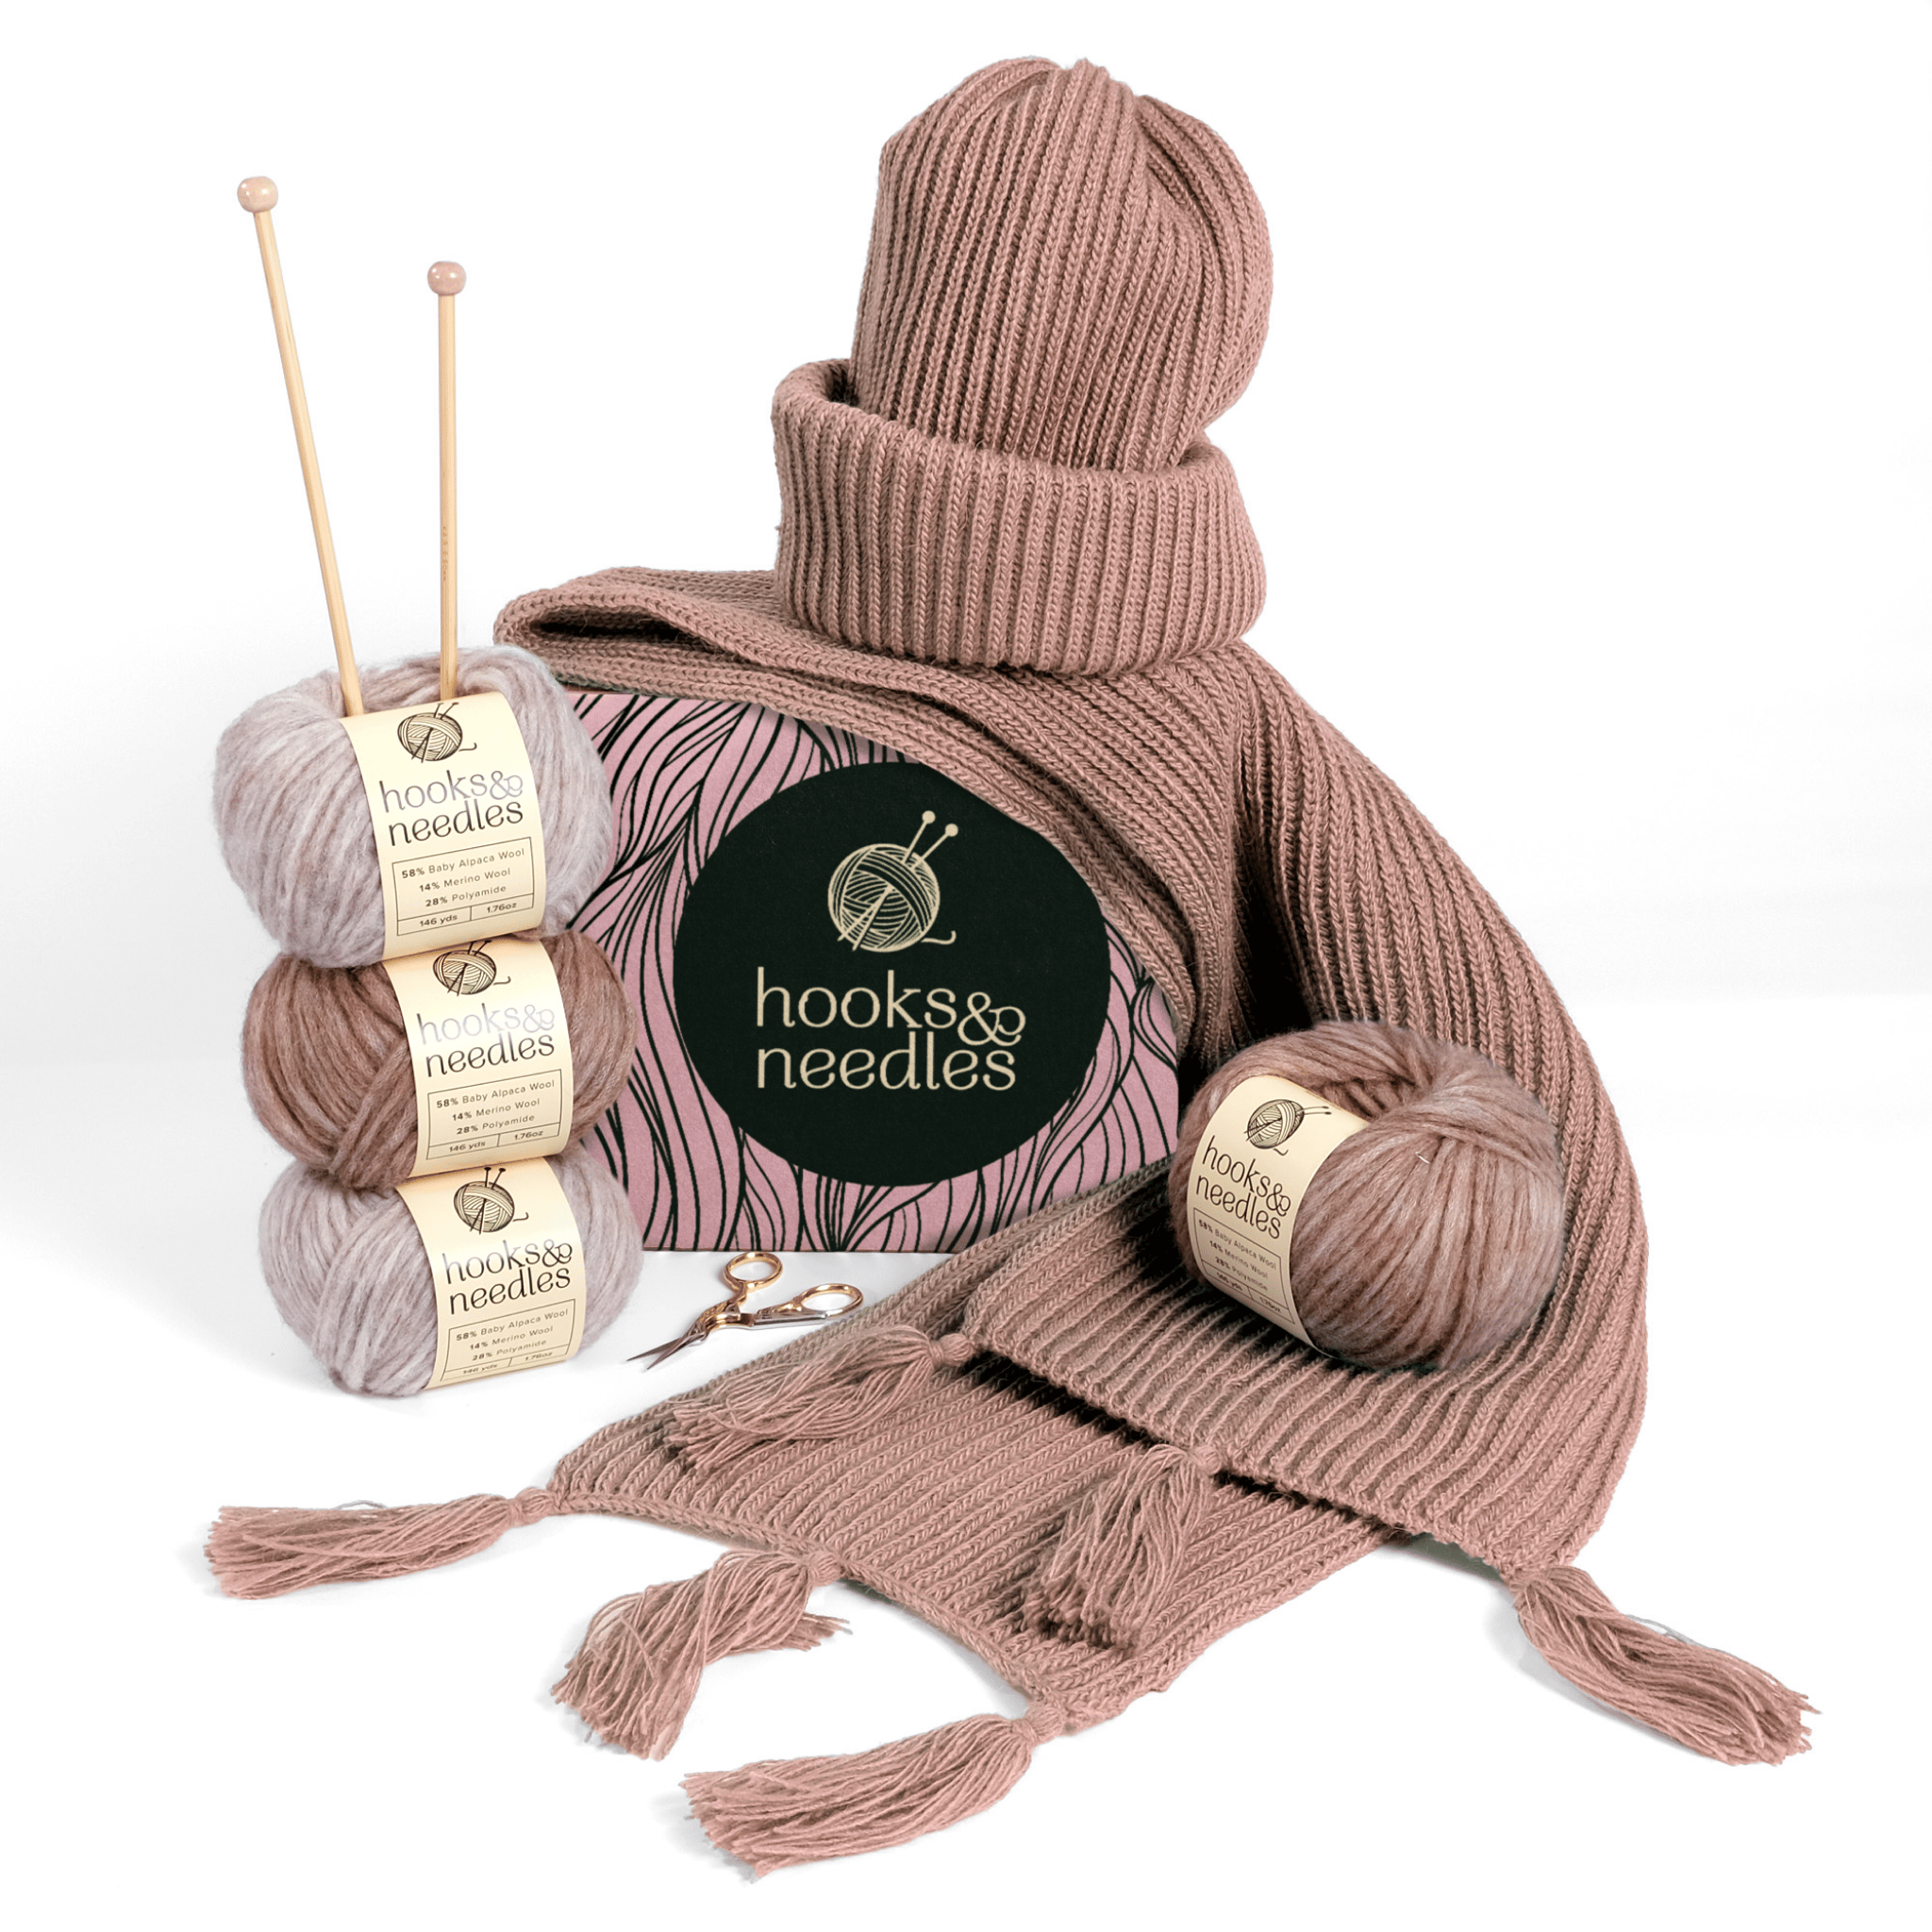 [6-Month-Prepaid] Hooks & Needles Subscription Box #15 including yarn balls, knitting needles, and a completed pink sweater with a hat and scarf on a white background.